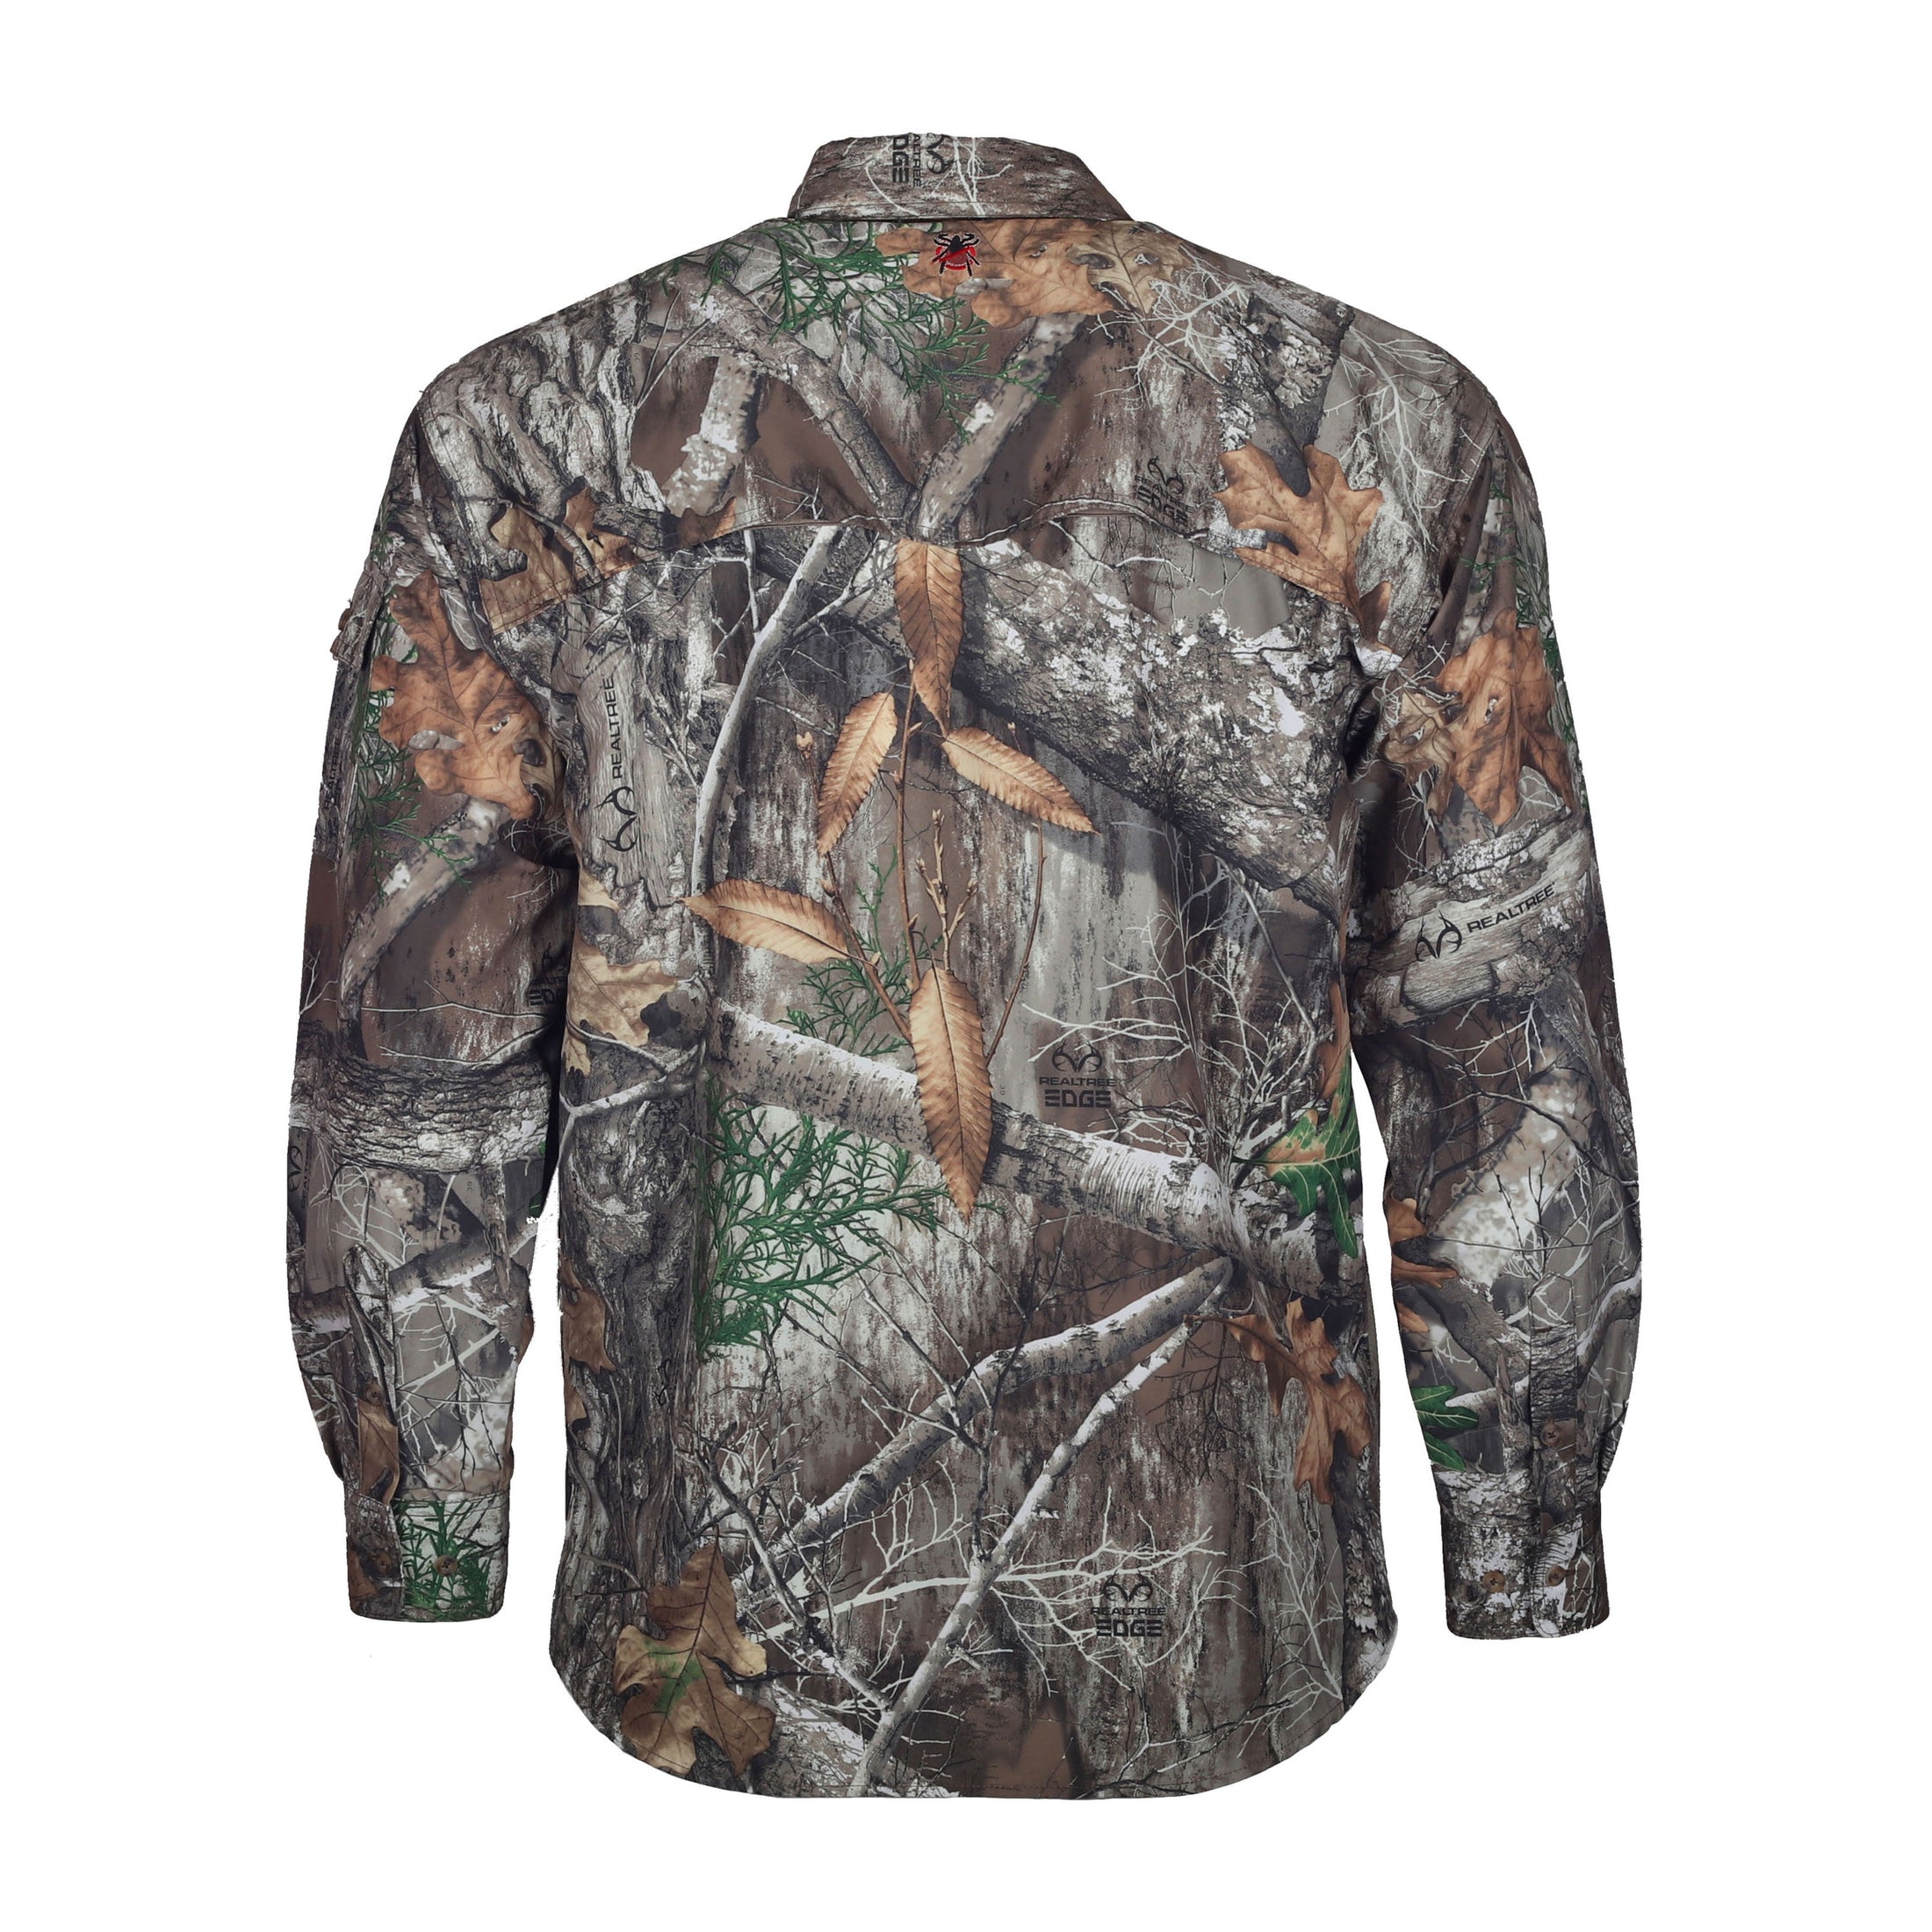 gamehide Elimitick Insect Repellent Ultra Lite Shirt back (realtree edge)